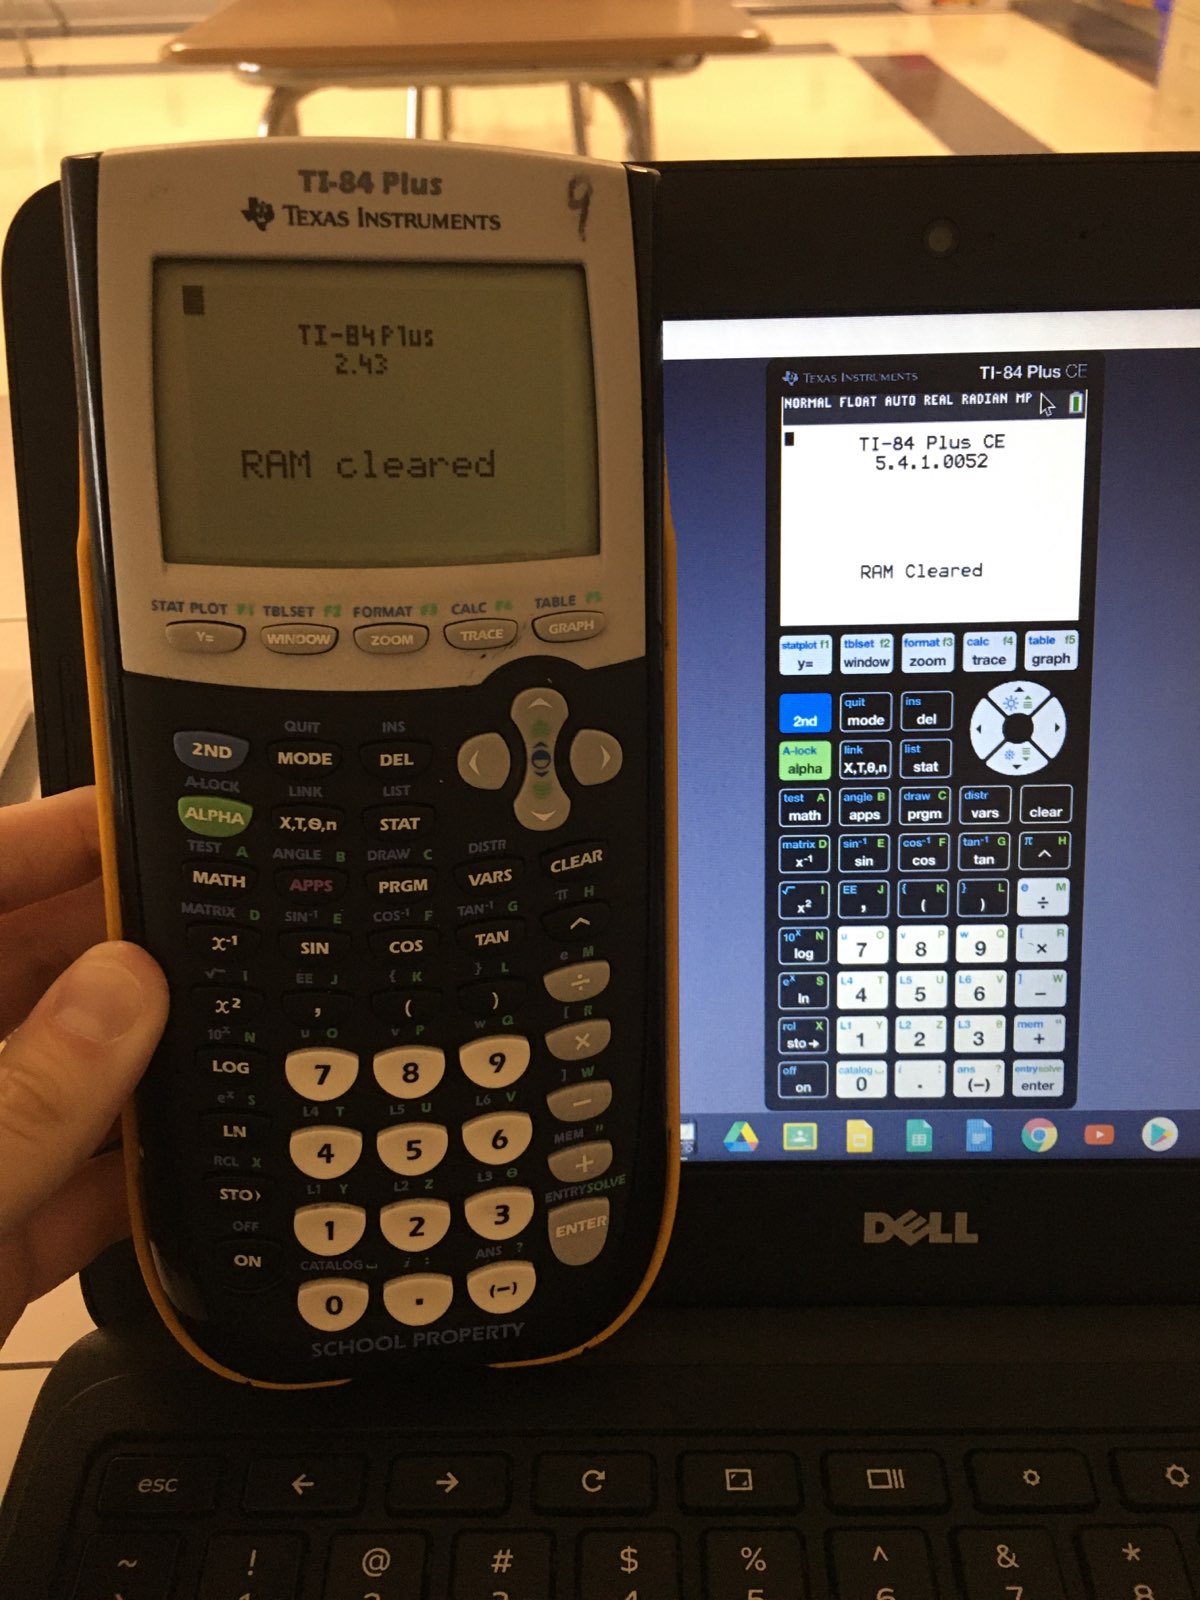 An image of a calculator and an app